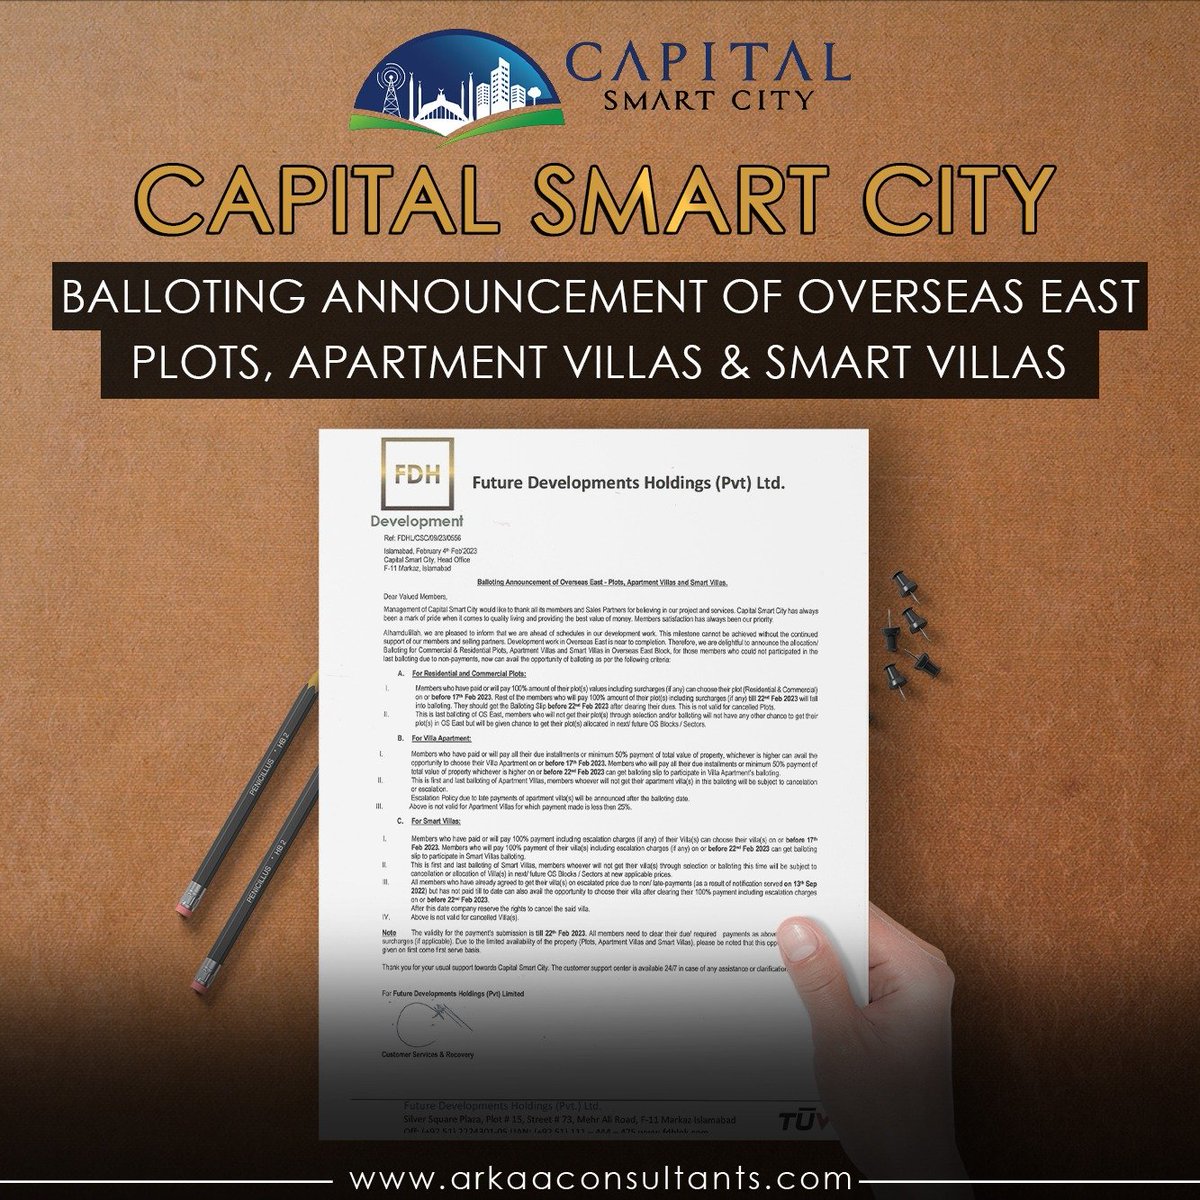 Managment of Capital Smart City have exciting news for all aspiring members and Sales Partners! 

#arkaaconsultants #Arkaa #HRL #FDHL #capitalsmartcity #capitalsmartcitypossession #overseaseast #OverseasPrimeBlock #OverseasPrime #balloting #DevelopmentUpdates #Progress